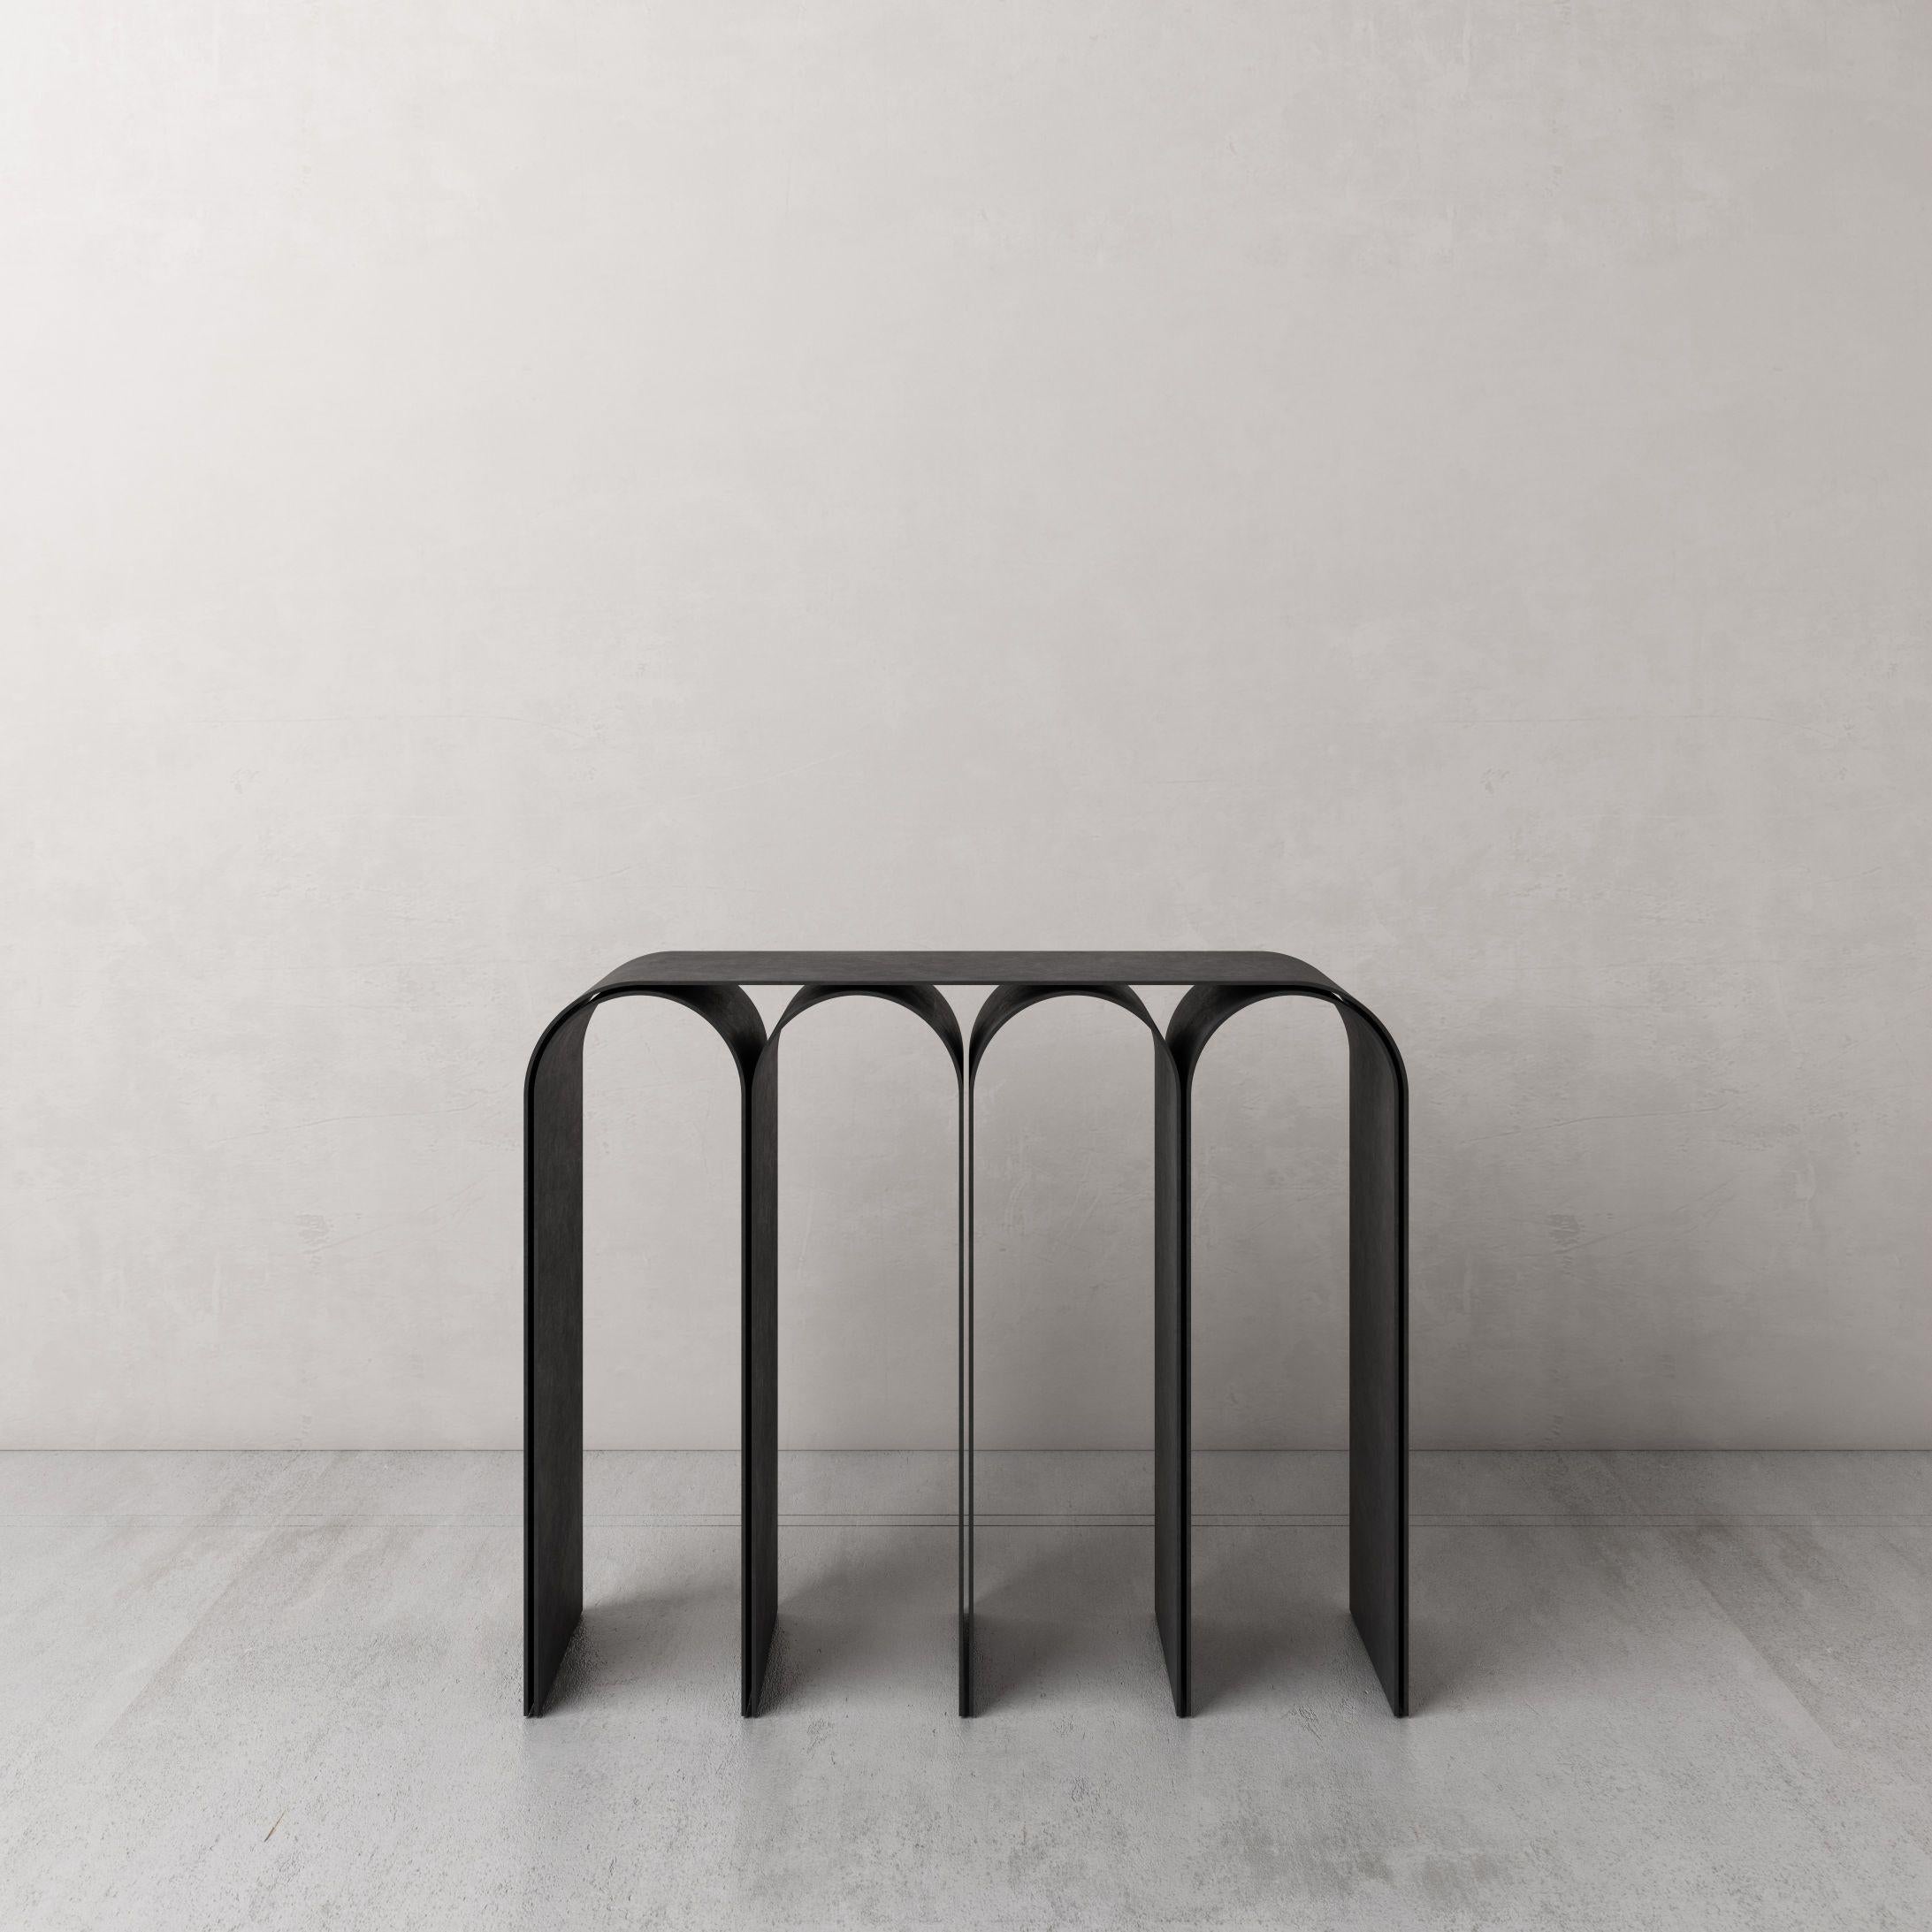 Gold arch console by Pietro Franceschini
Sold exclusively by Galerie Philia
Manufacturer: Prinzivalli
Dimensions: W 103 x L 30 x H 86 cm
Materials: Black Steel

Available finishes:
Steel (black, white, brass finish)
Aluminum (silver finish)
Brass